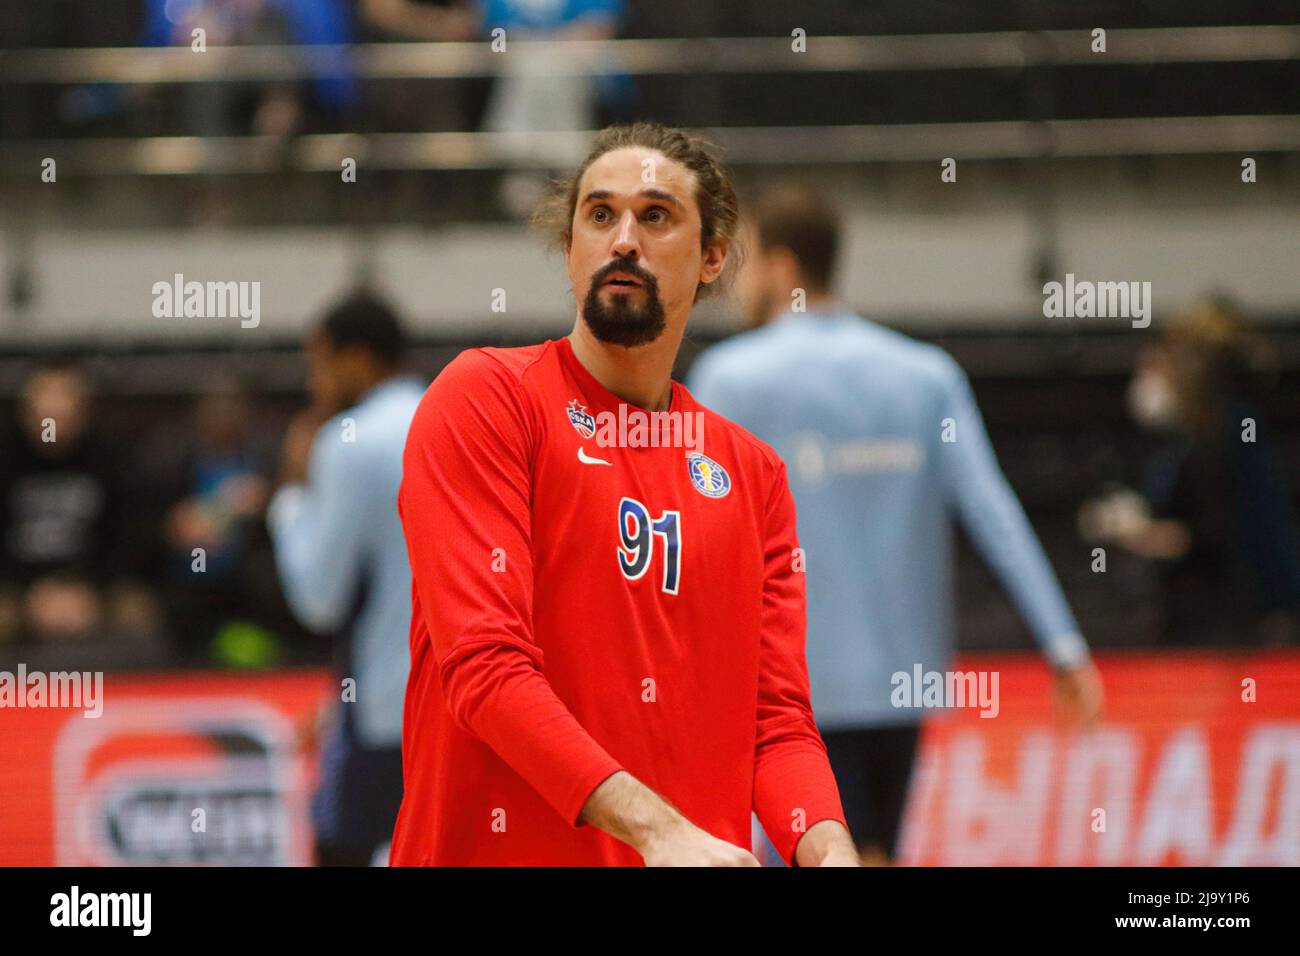 Saint Petersburg, Russia. 25th May, 2022. Alexey Shved (No.91) of CSKA seen  in action during the third match final of the VTB United League basketball  match between Zenit and CSKA at Sibur